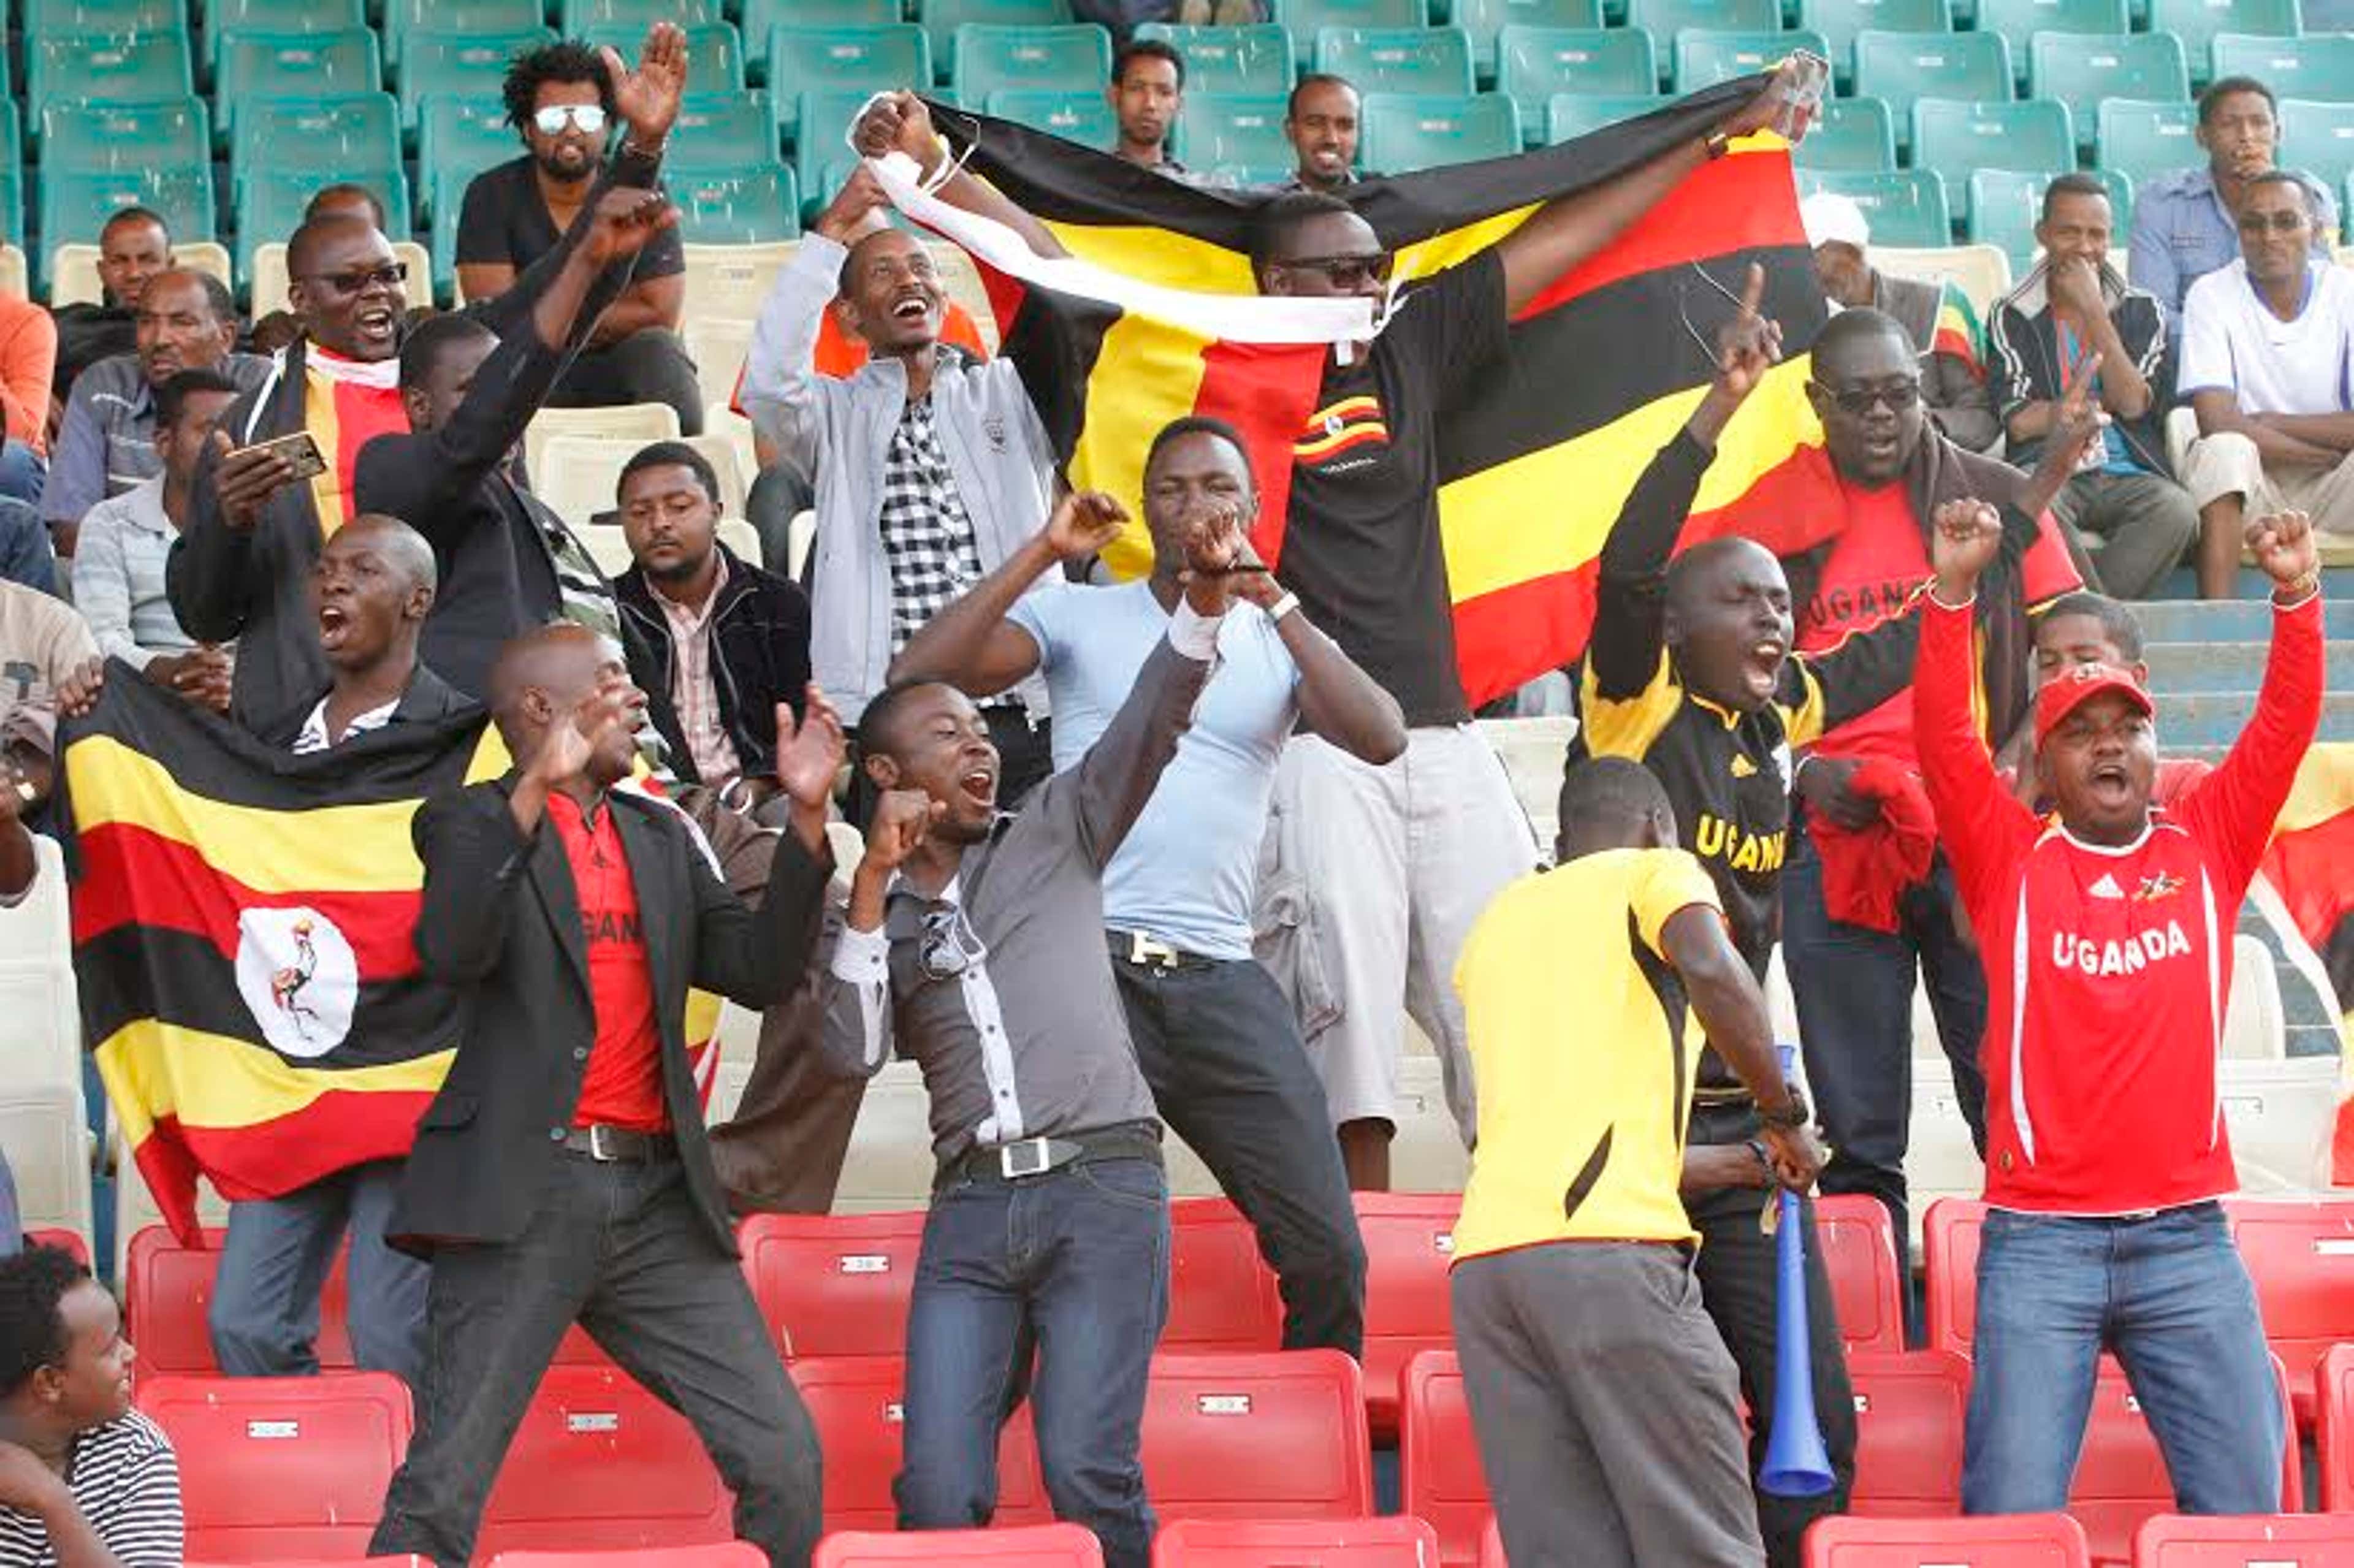 Uganda Cranes came into the final as favorites considering their ever rising form since losing to Kenya in opener